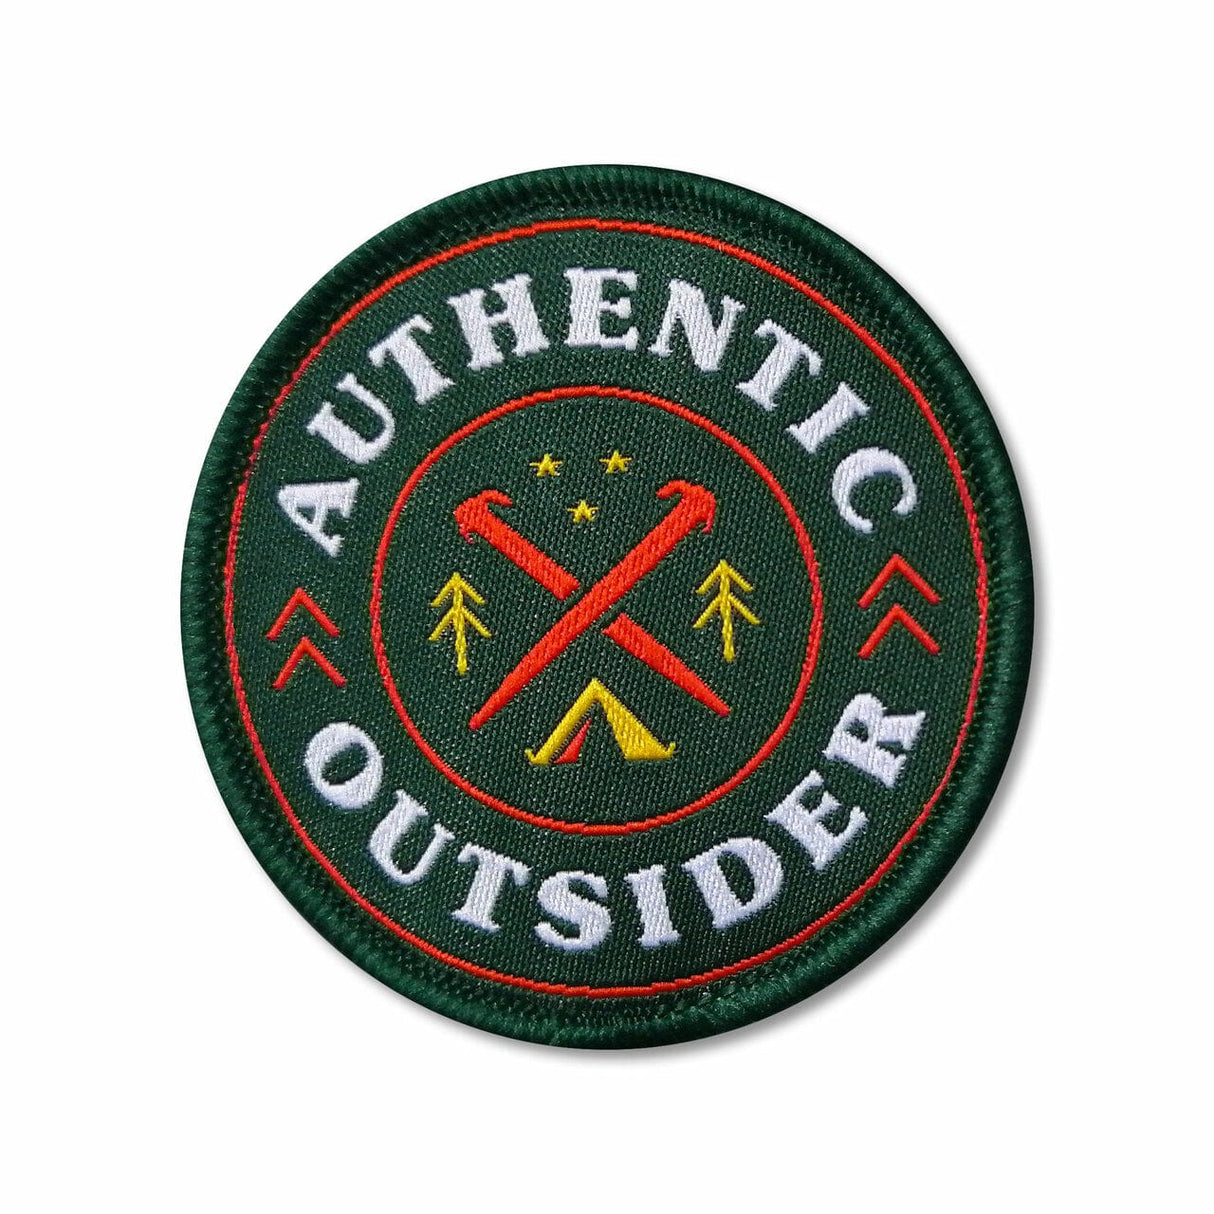 Authentic Outsider Patch